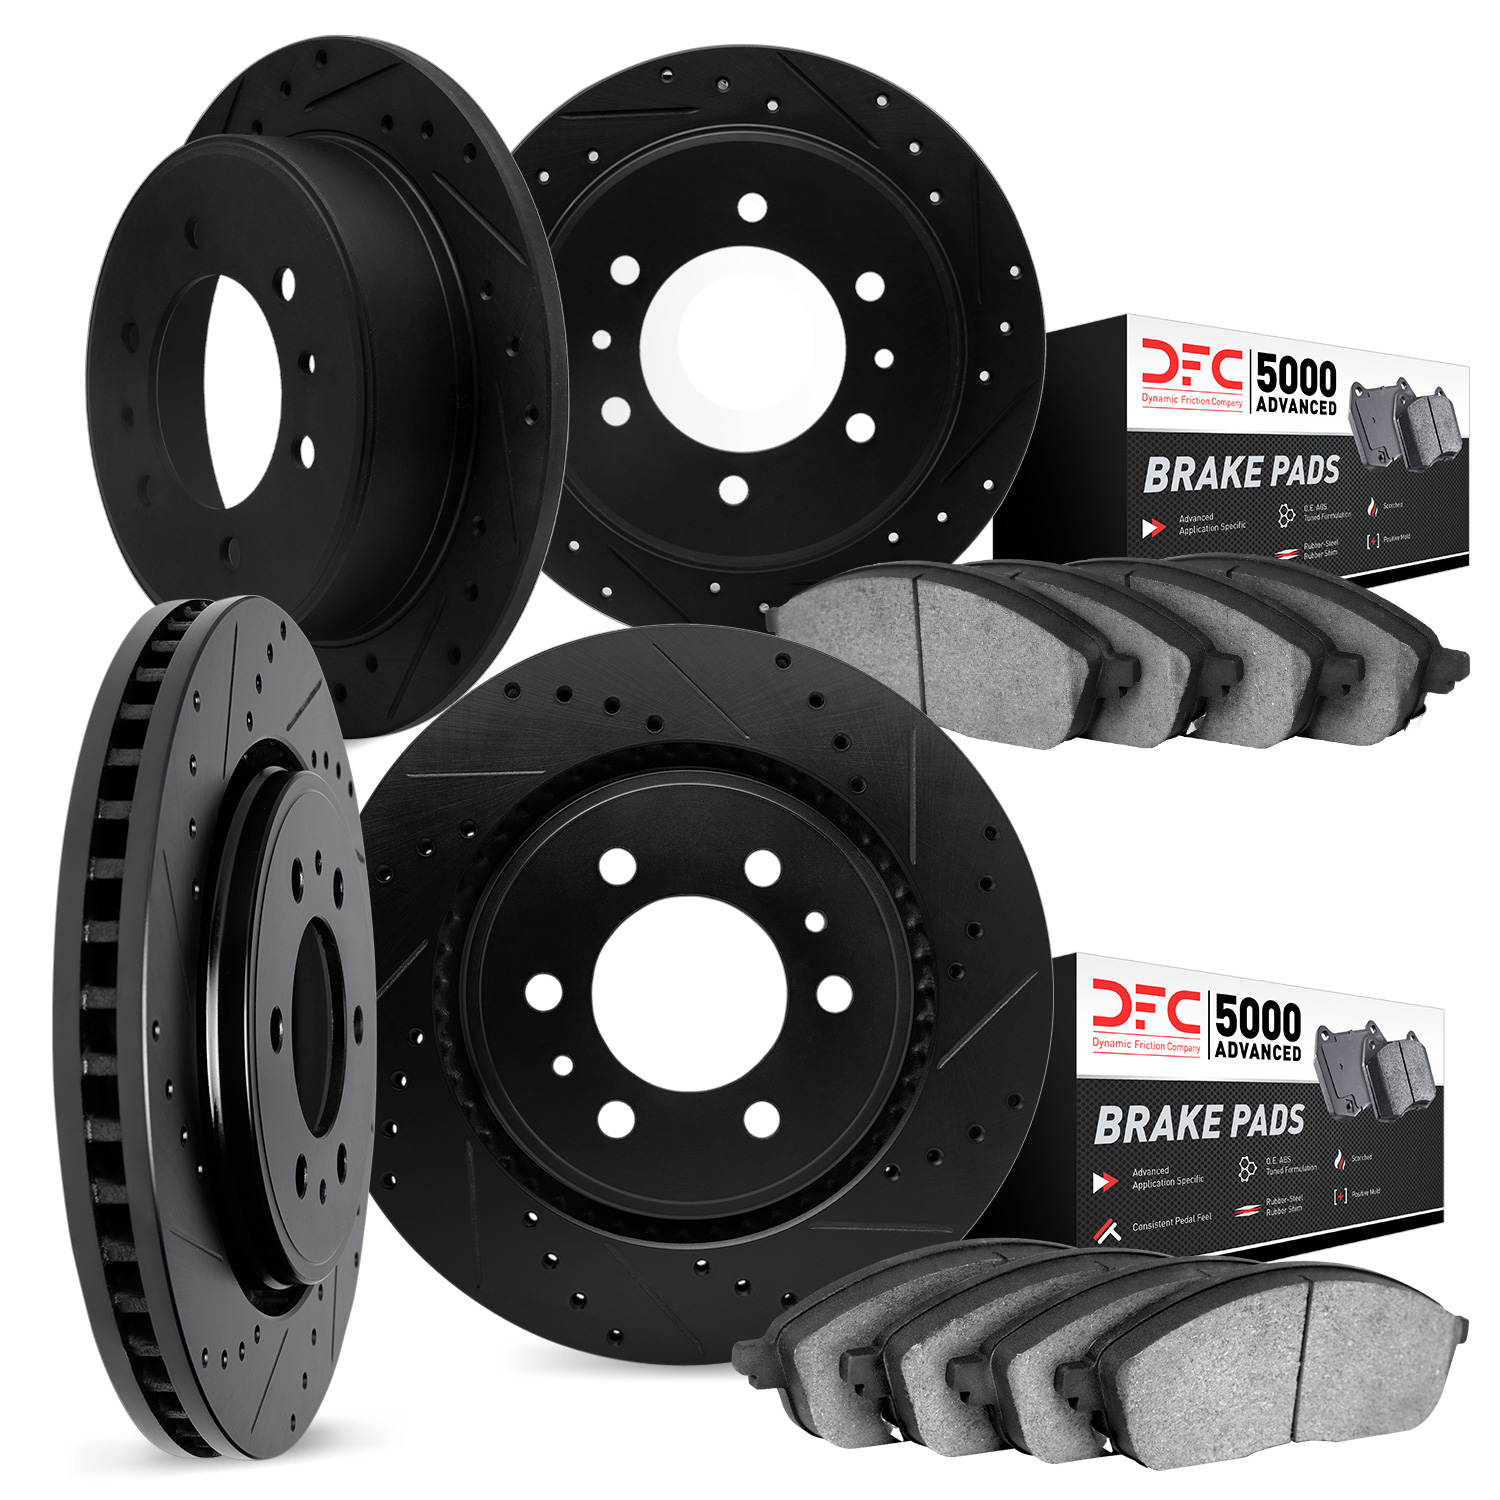 7504-52008 Drilled/Slotted Brake Rotors w/5000 Advanced Brake Pads Kit [Silver], 2006-2006 GM, Position: Front and Rear